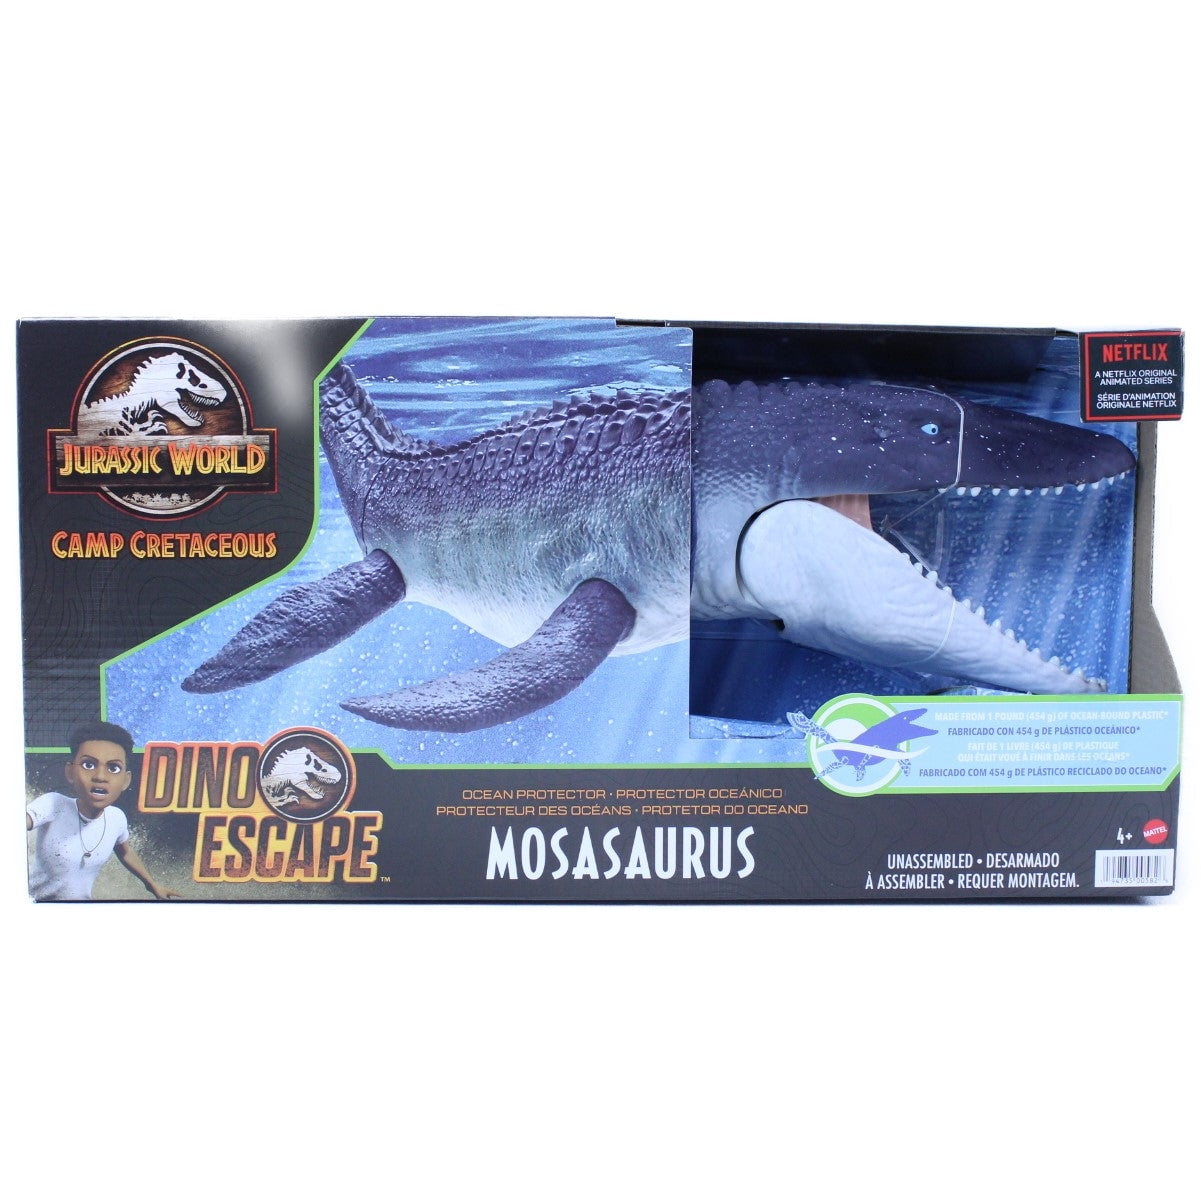  Jurassic World Toys Ocean Protector Mosasaurus Dinosaur Action  Figure Sculpted with Movable Joints Made from 1 Pound of Oceanbound  Plastic, Kids Toy Ages 4 Years & Older : Toys & Games